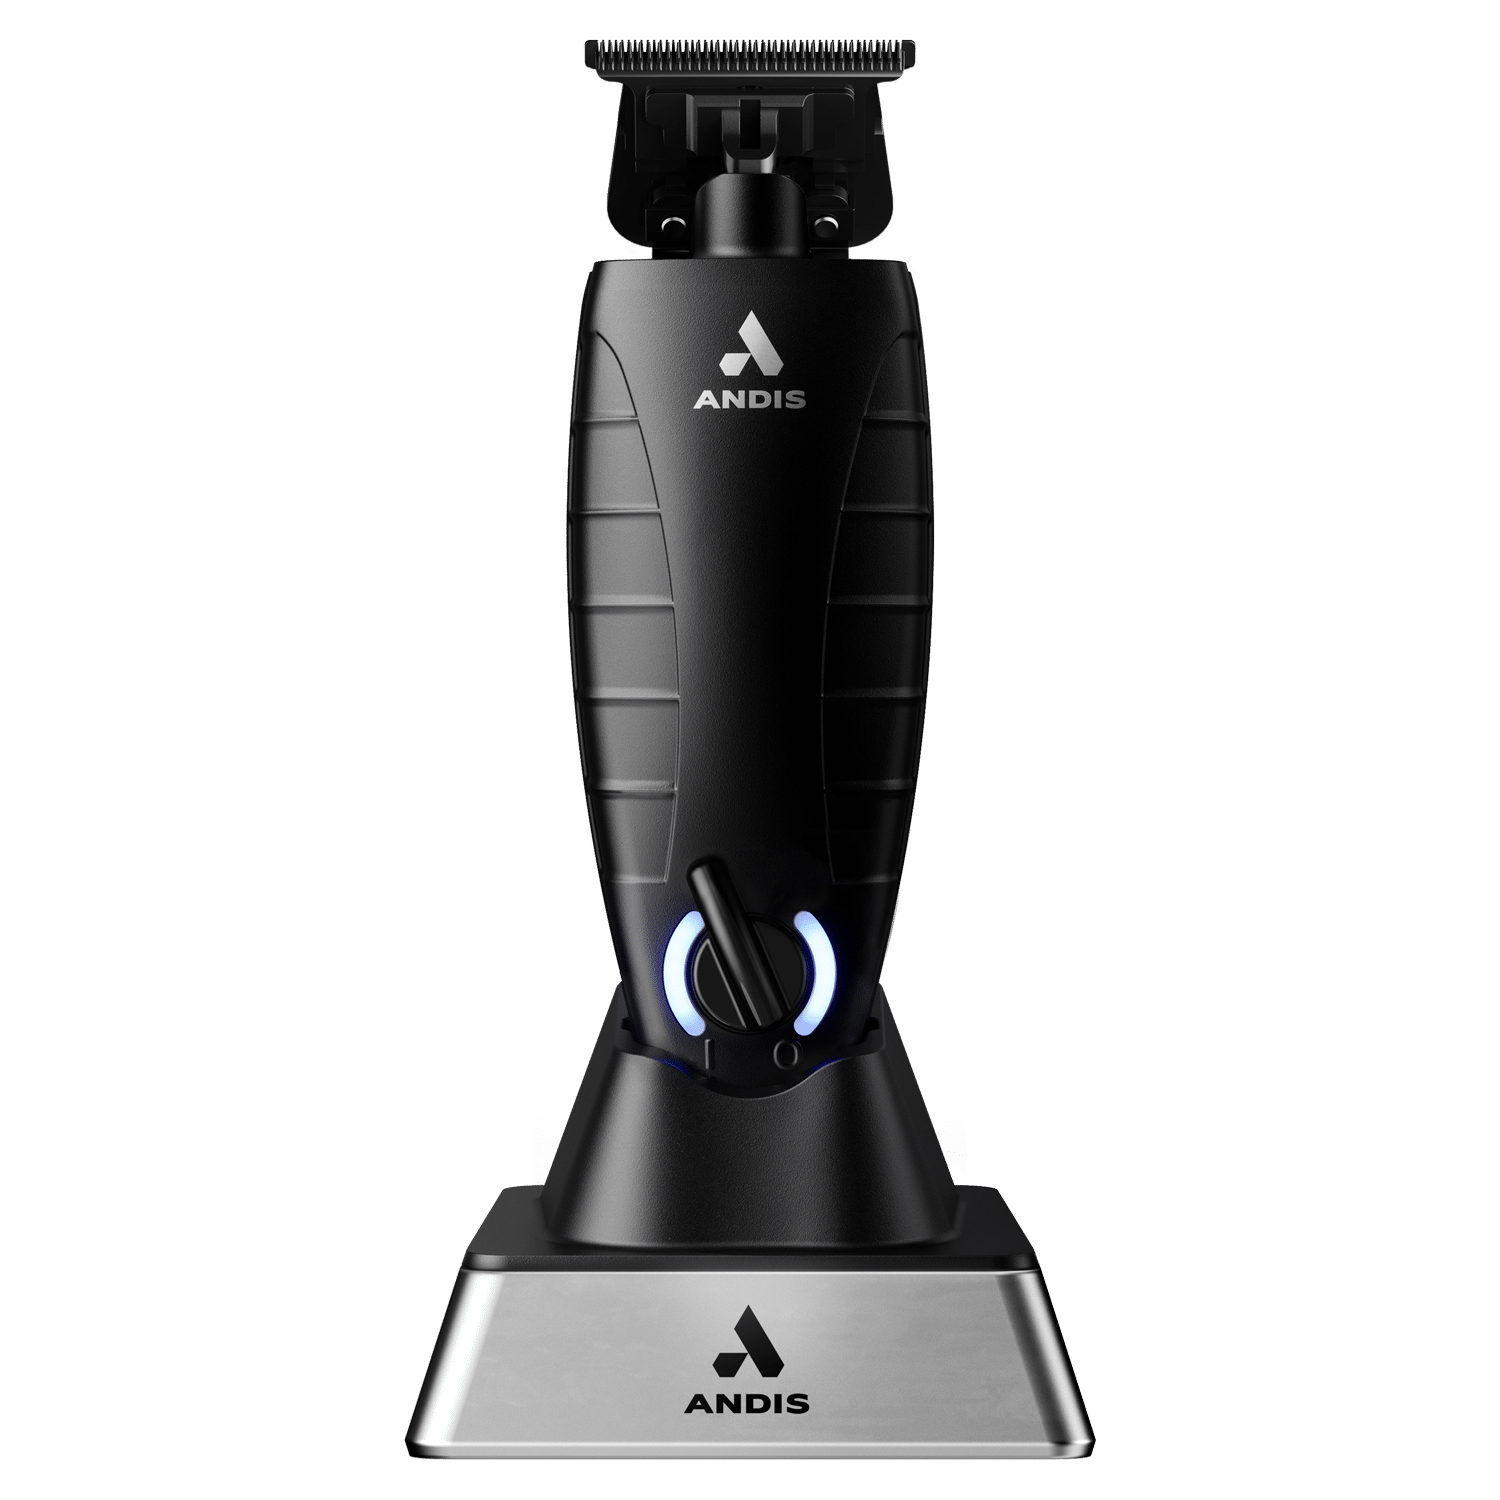 Andis GTX-Exo Black Label M-Force Special Edition Cordless Trimmer #561862 - On Charging Stand